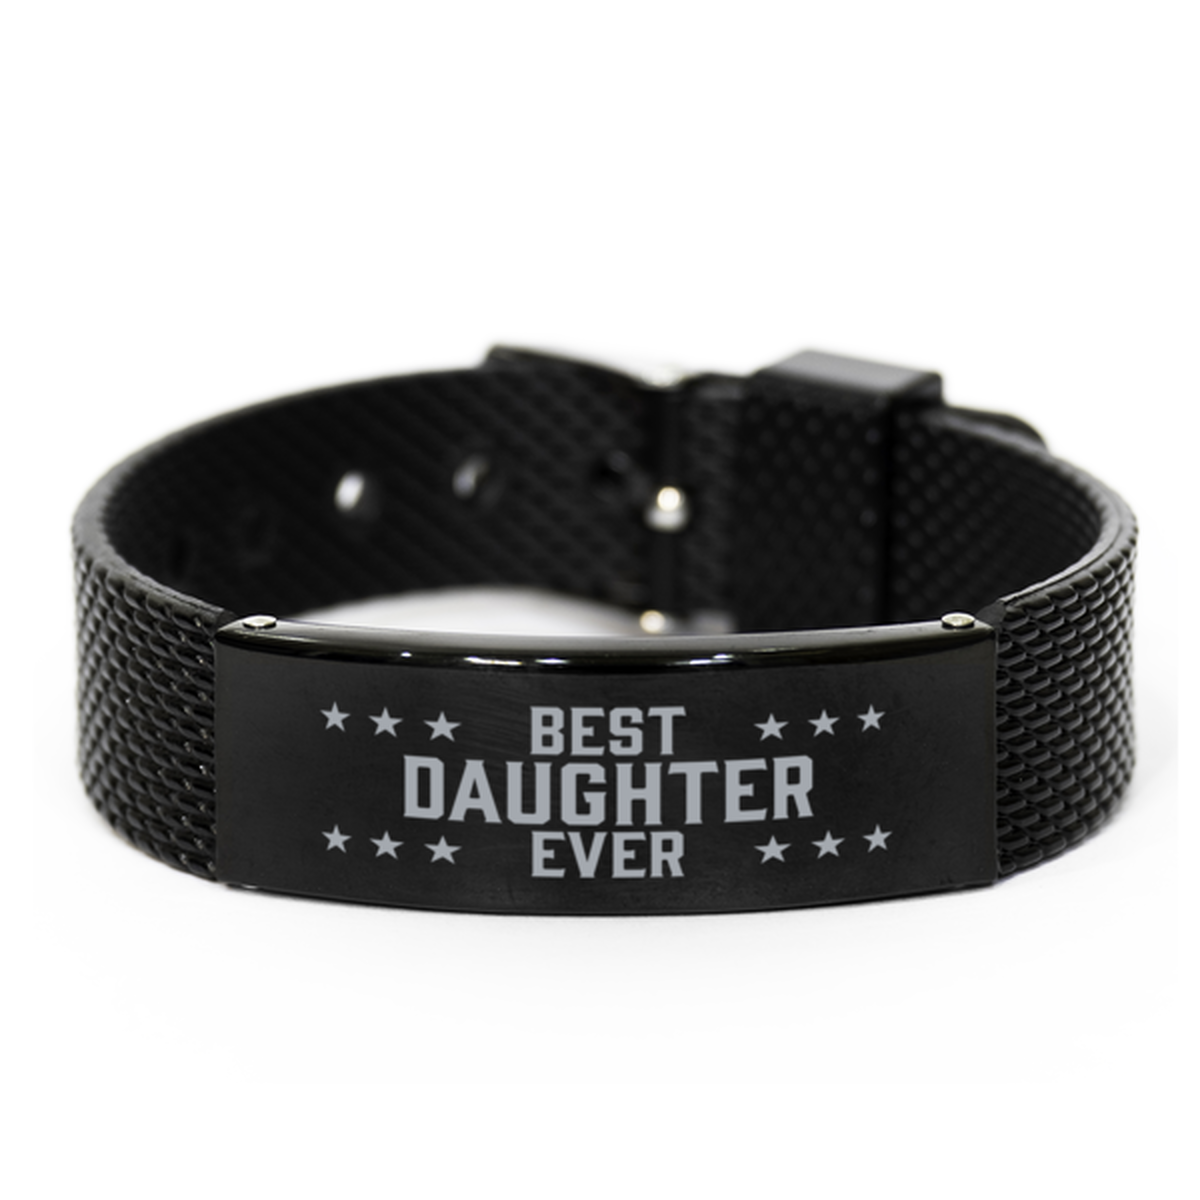 Best Daughter Ever Daughter Gifts, Gag Engraved Bracelet For Daughter, Best Family Gifts For Women